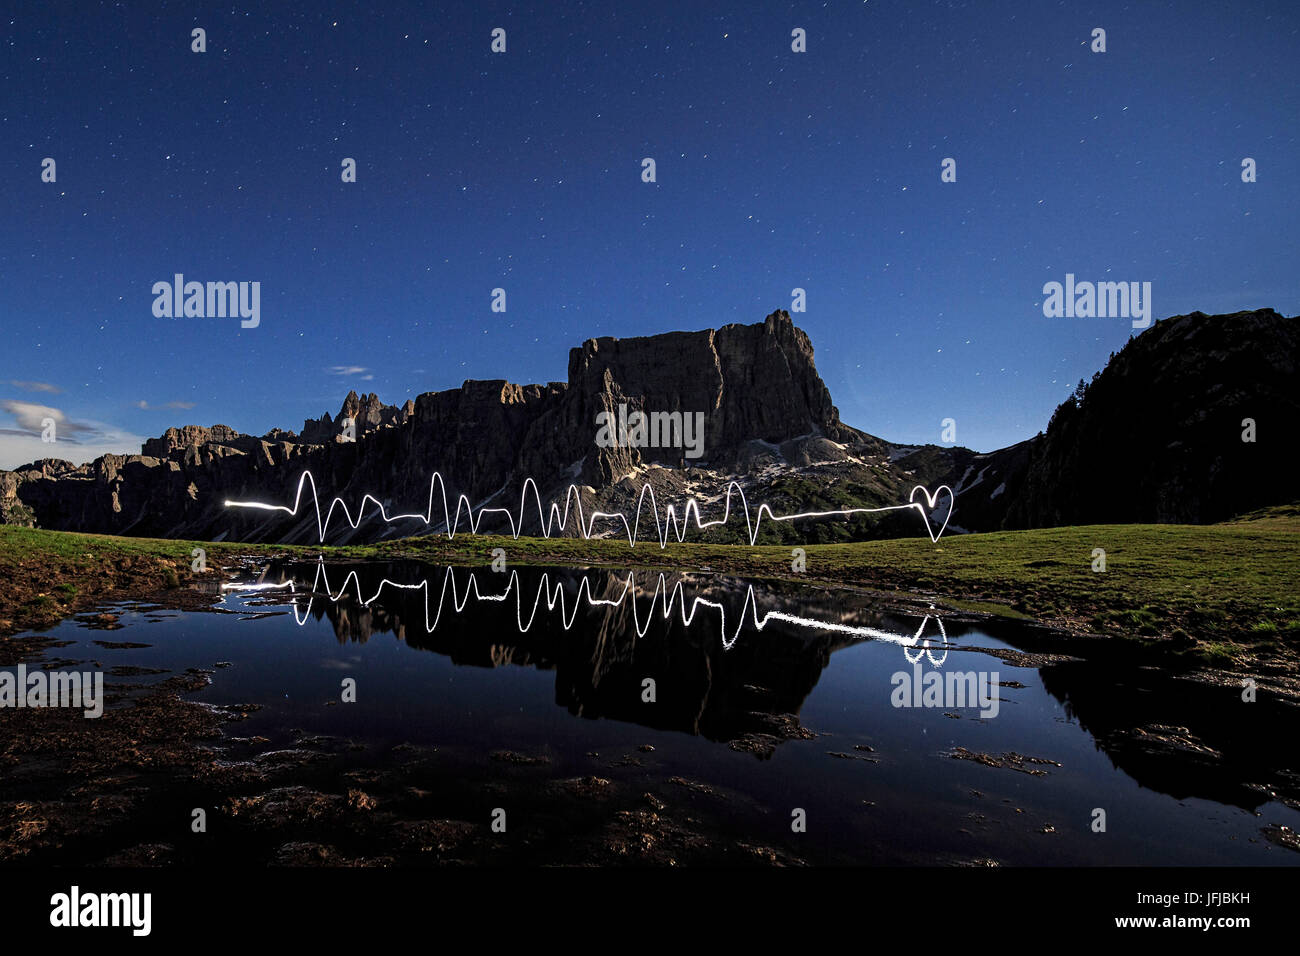 Light painting in front of Lastroni of Formin at Giau Pass during a full moon night, Cortina d'Ampezzo, Dolomites, Veneto, Italy, Europe Stock Photo